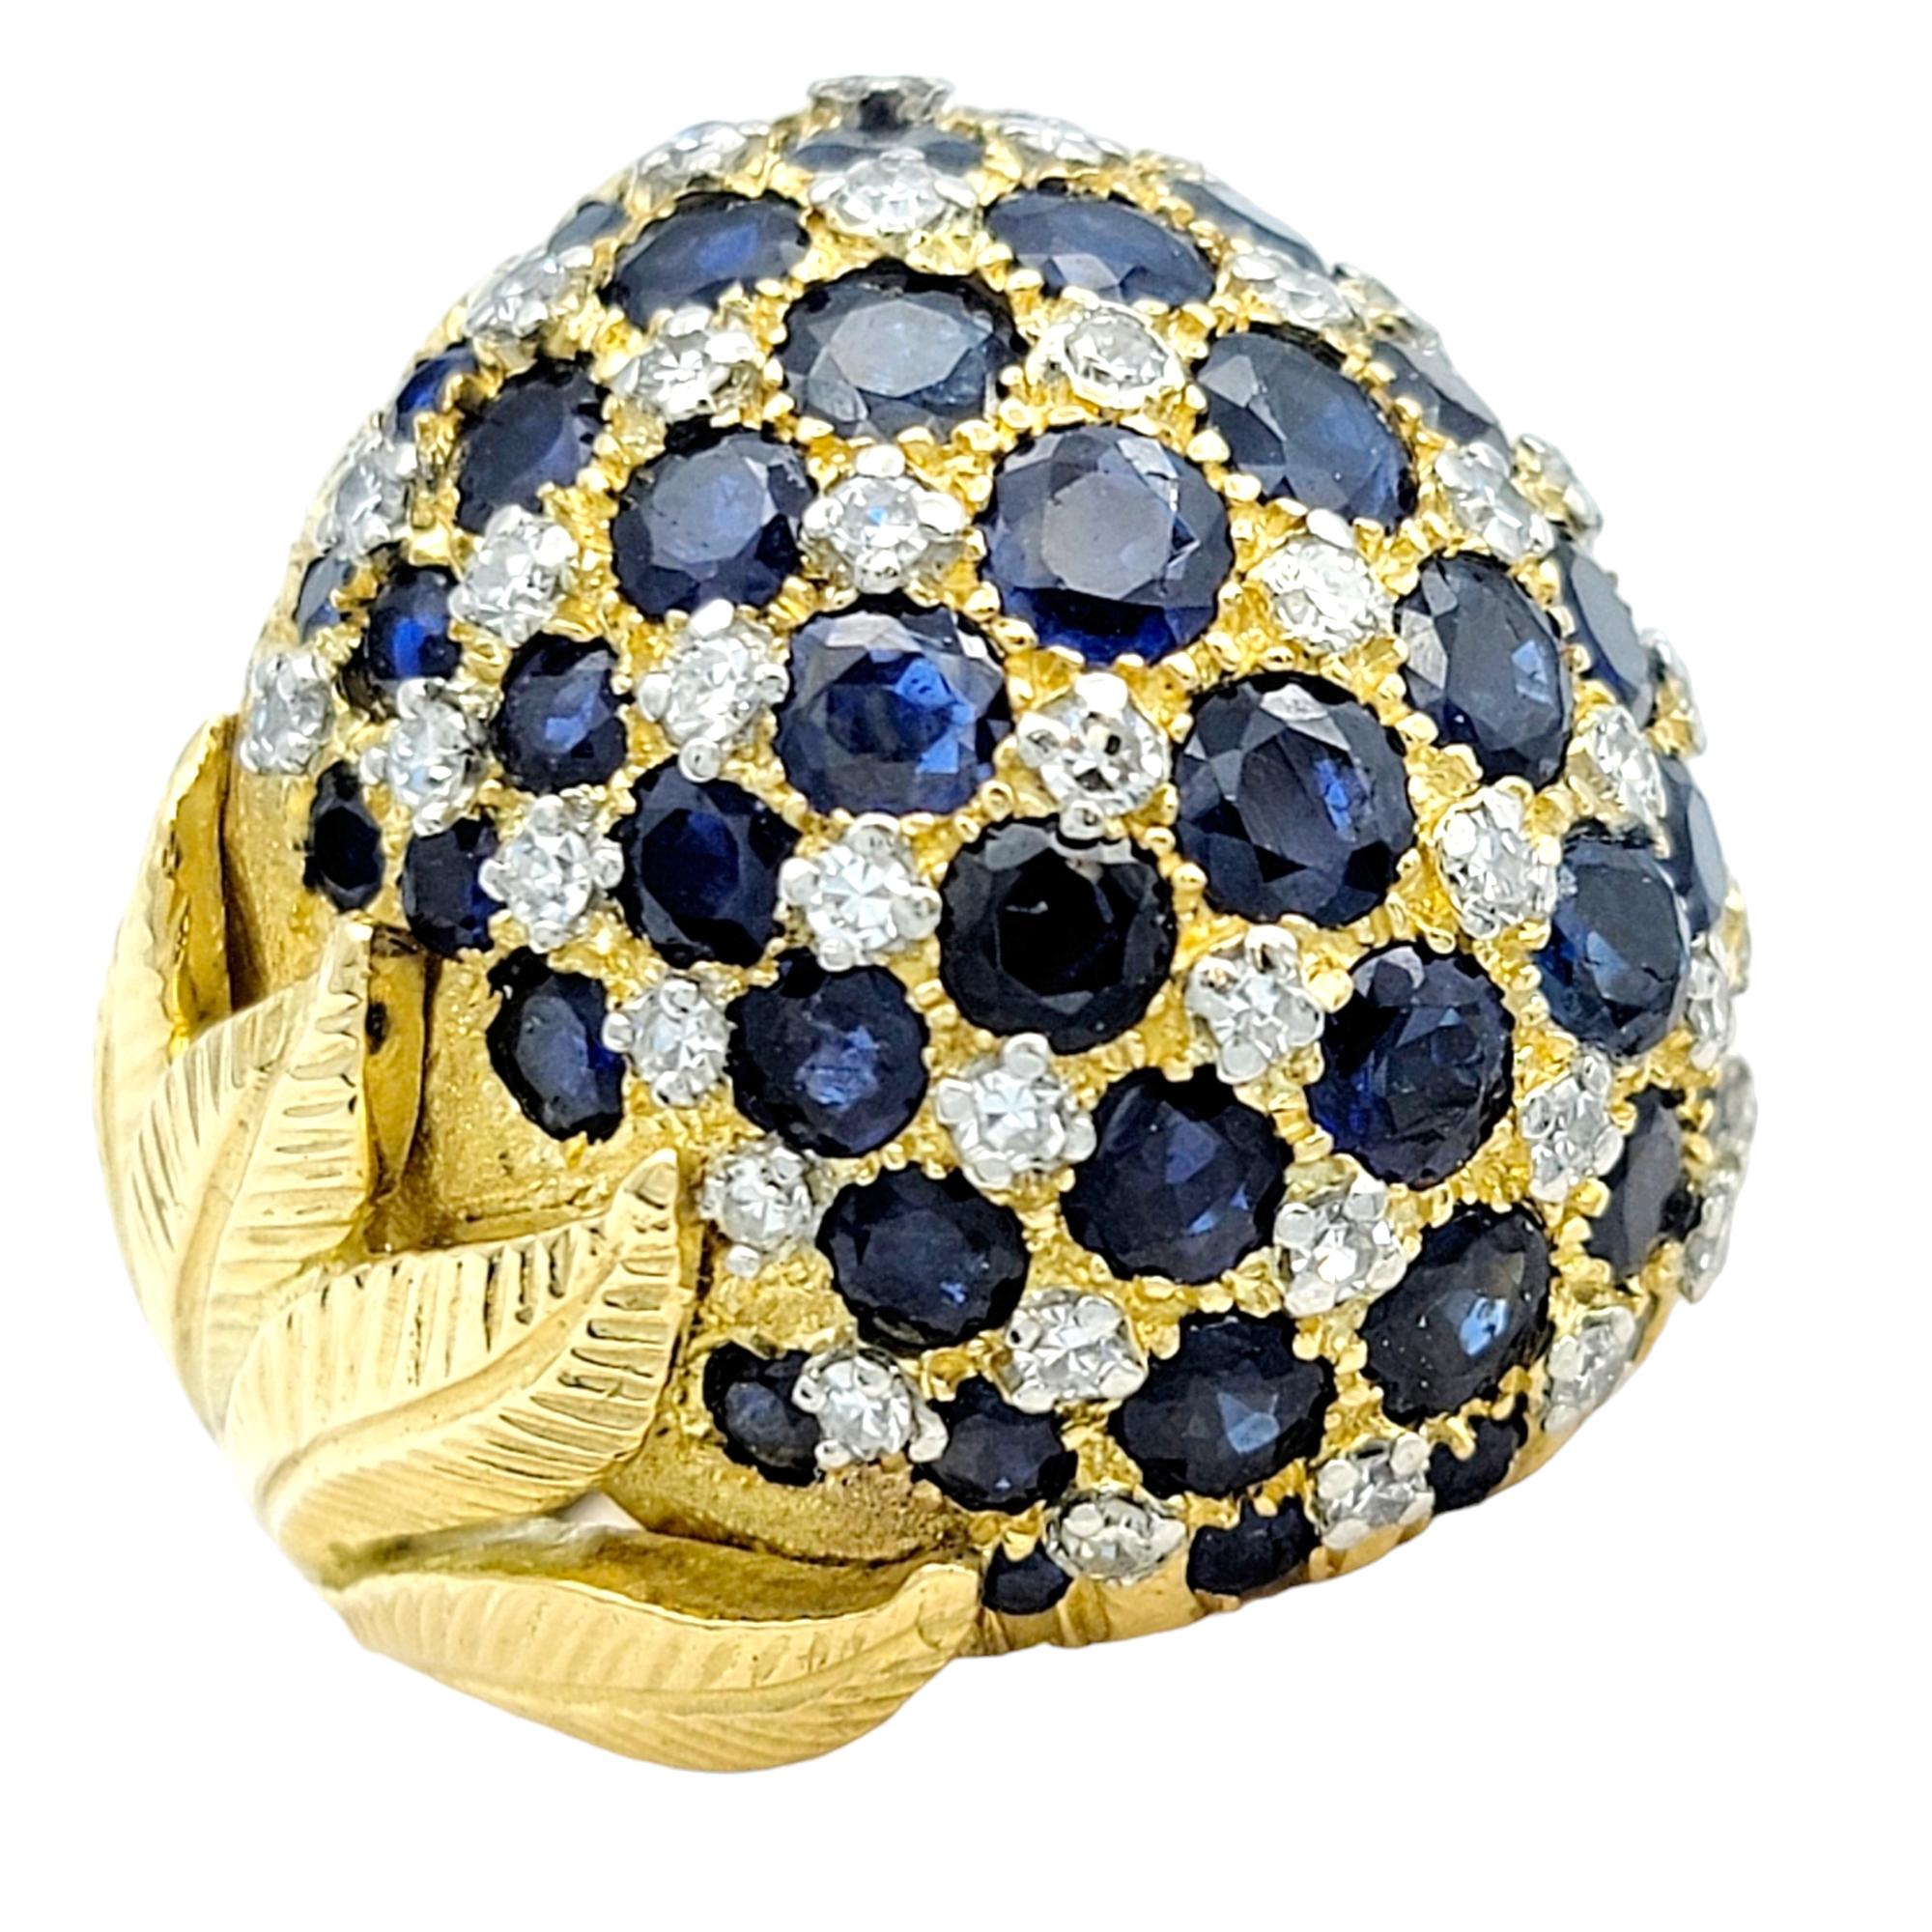 Ring size: 5.25

This opulent dome ring is a true embodiment of luxury and craftsmanship. Crafted in lustrous 18 karat yellow gold, this ring exudes timeless elegance with a contemporary feel.

The focal point of this remarkable piece is an array of